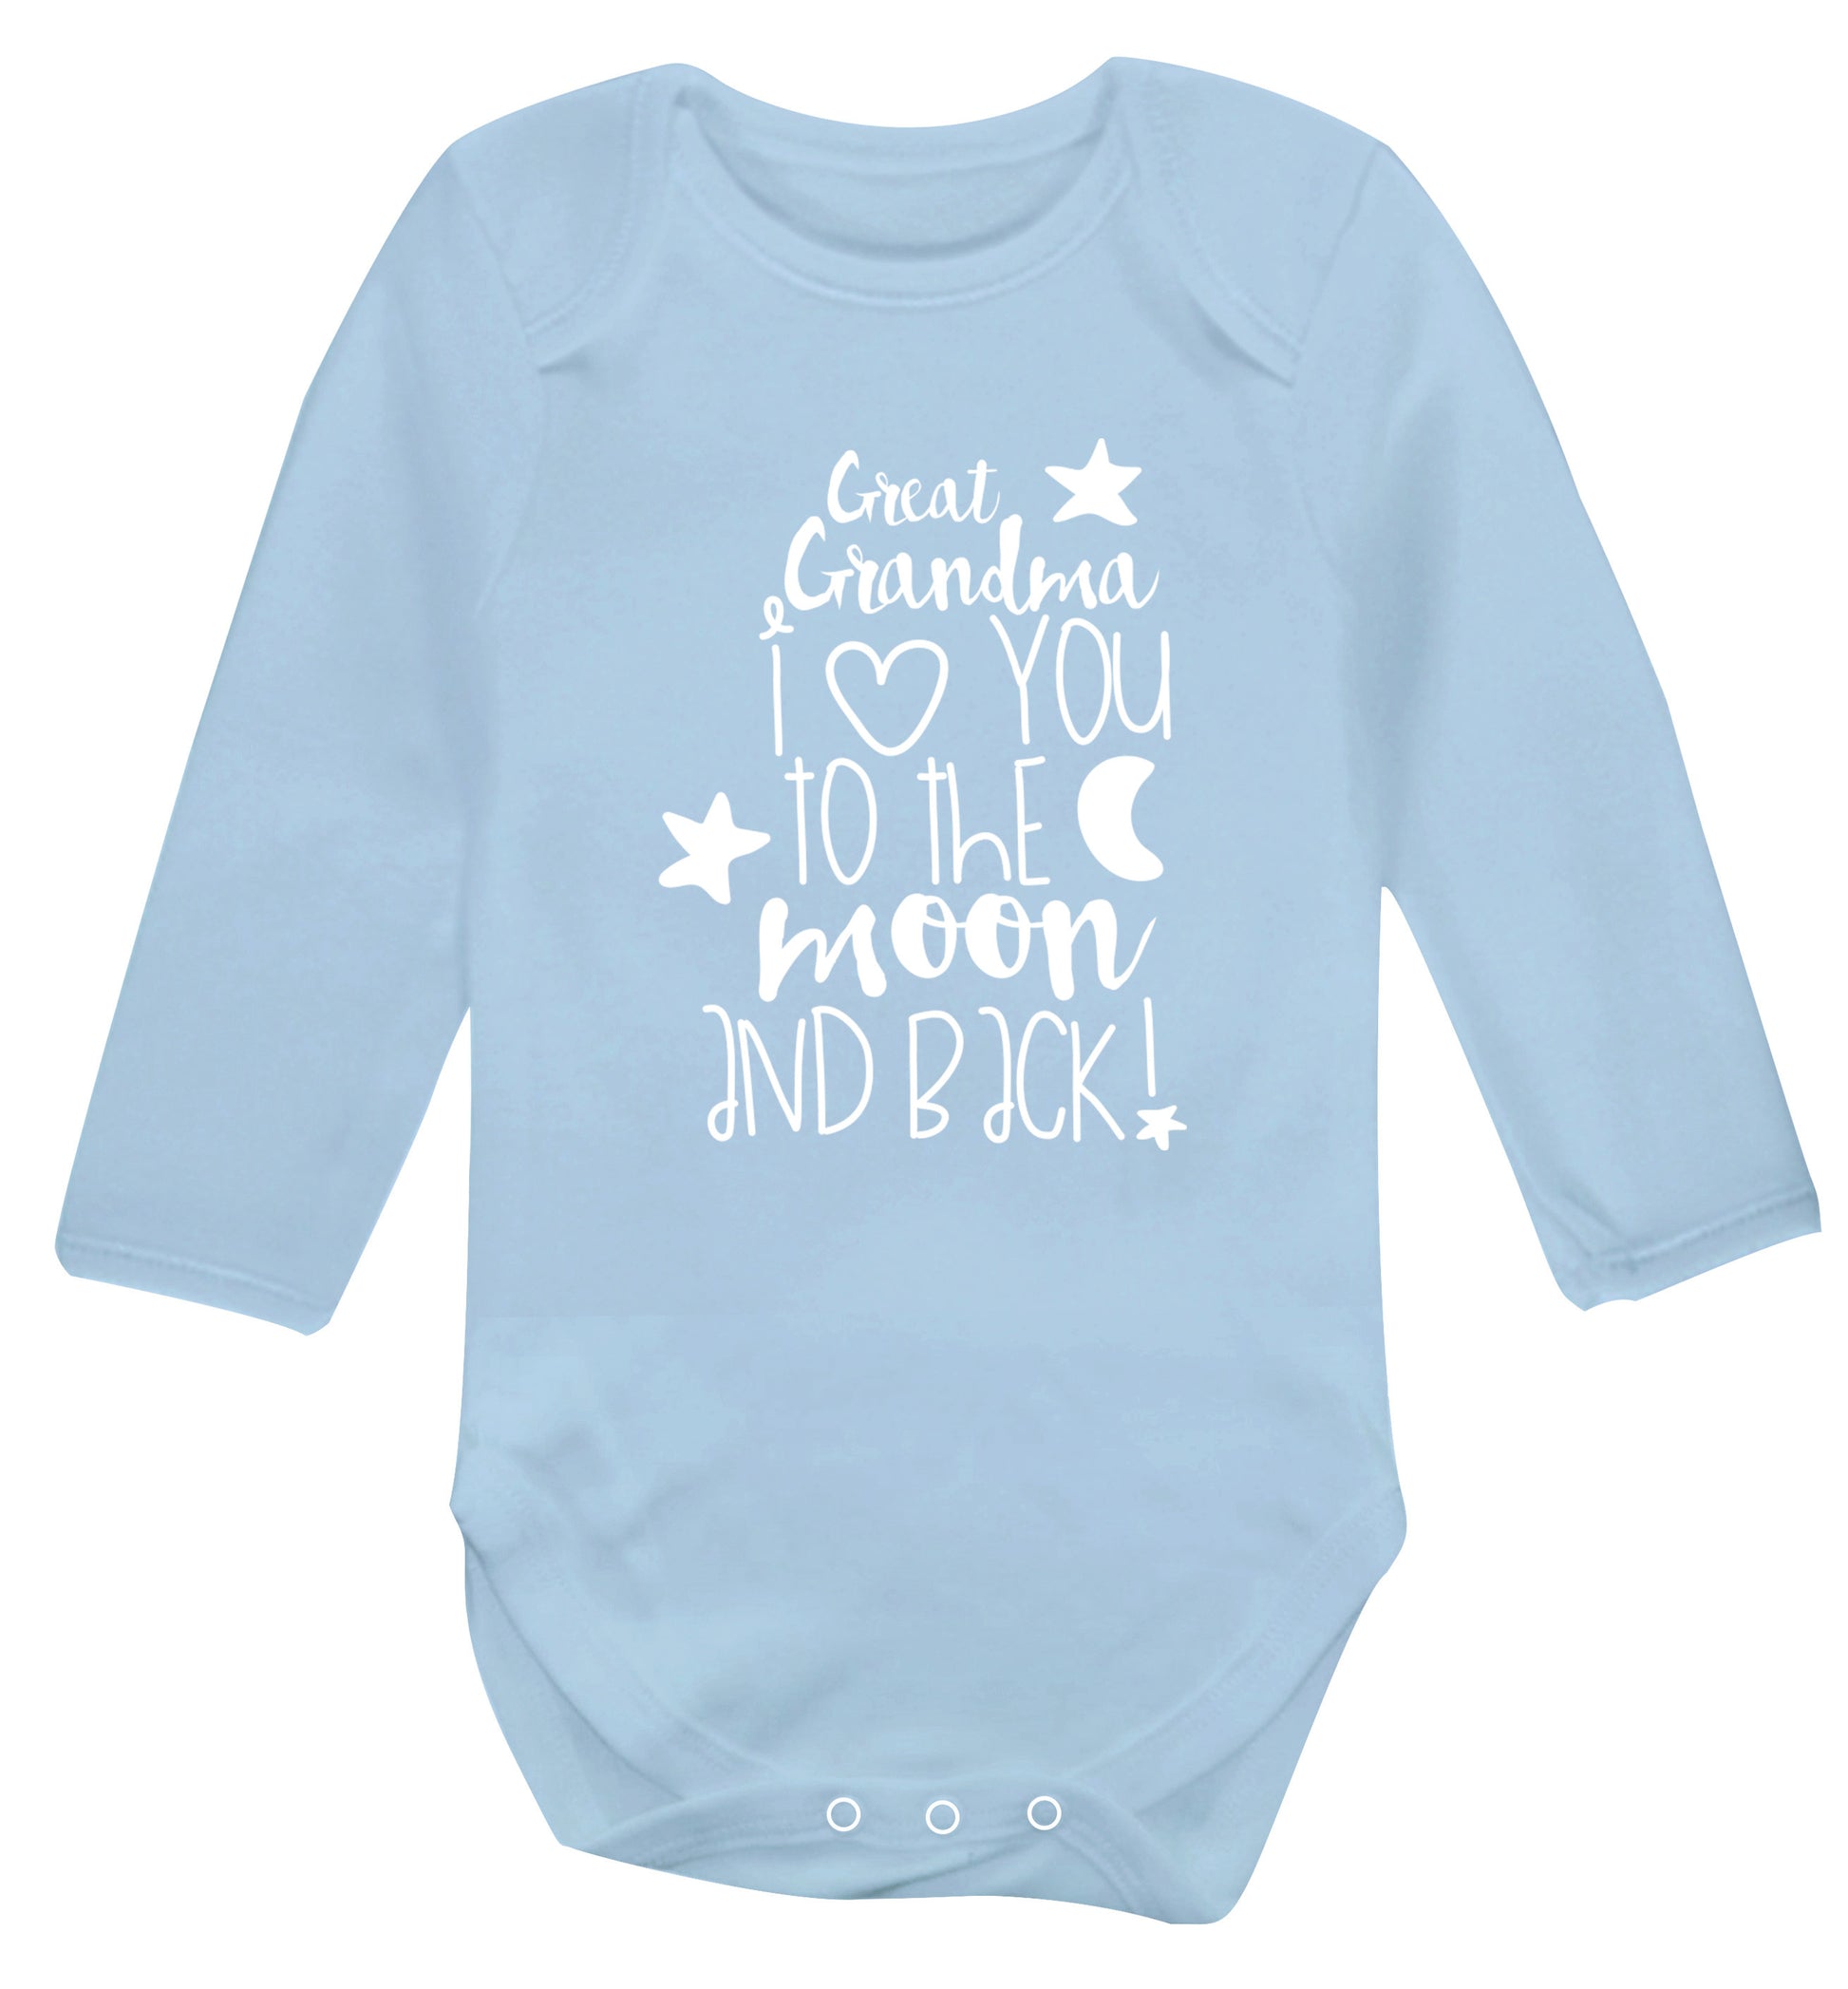 Great Grandma I love you to the moon and back Baby Vest long sleeved pale blue 6-12 months